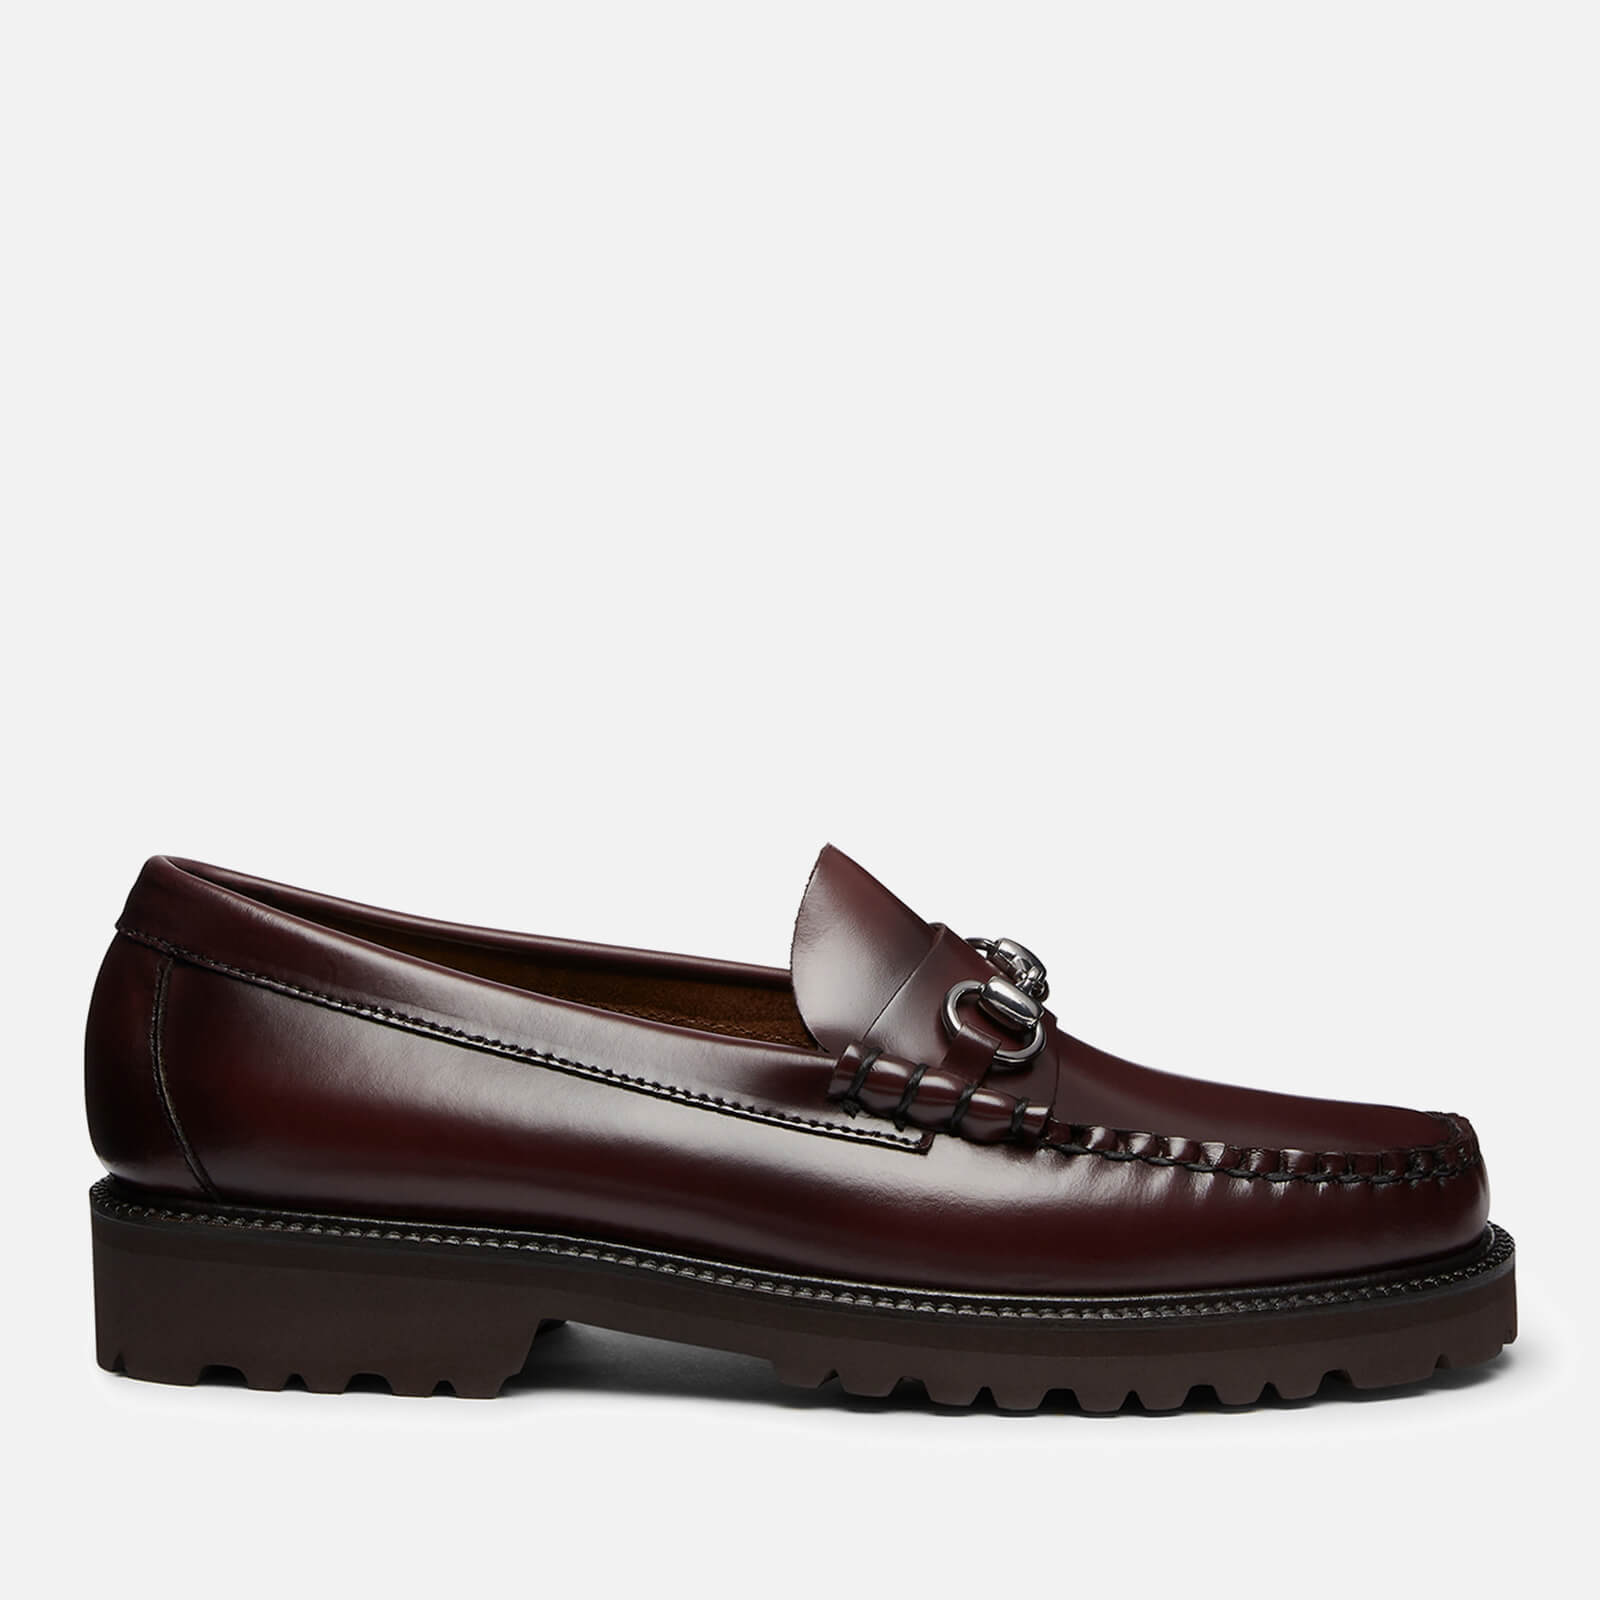 G.H.BASS Men's Weejun 90 Lincoln Leather Penny Loafer